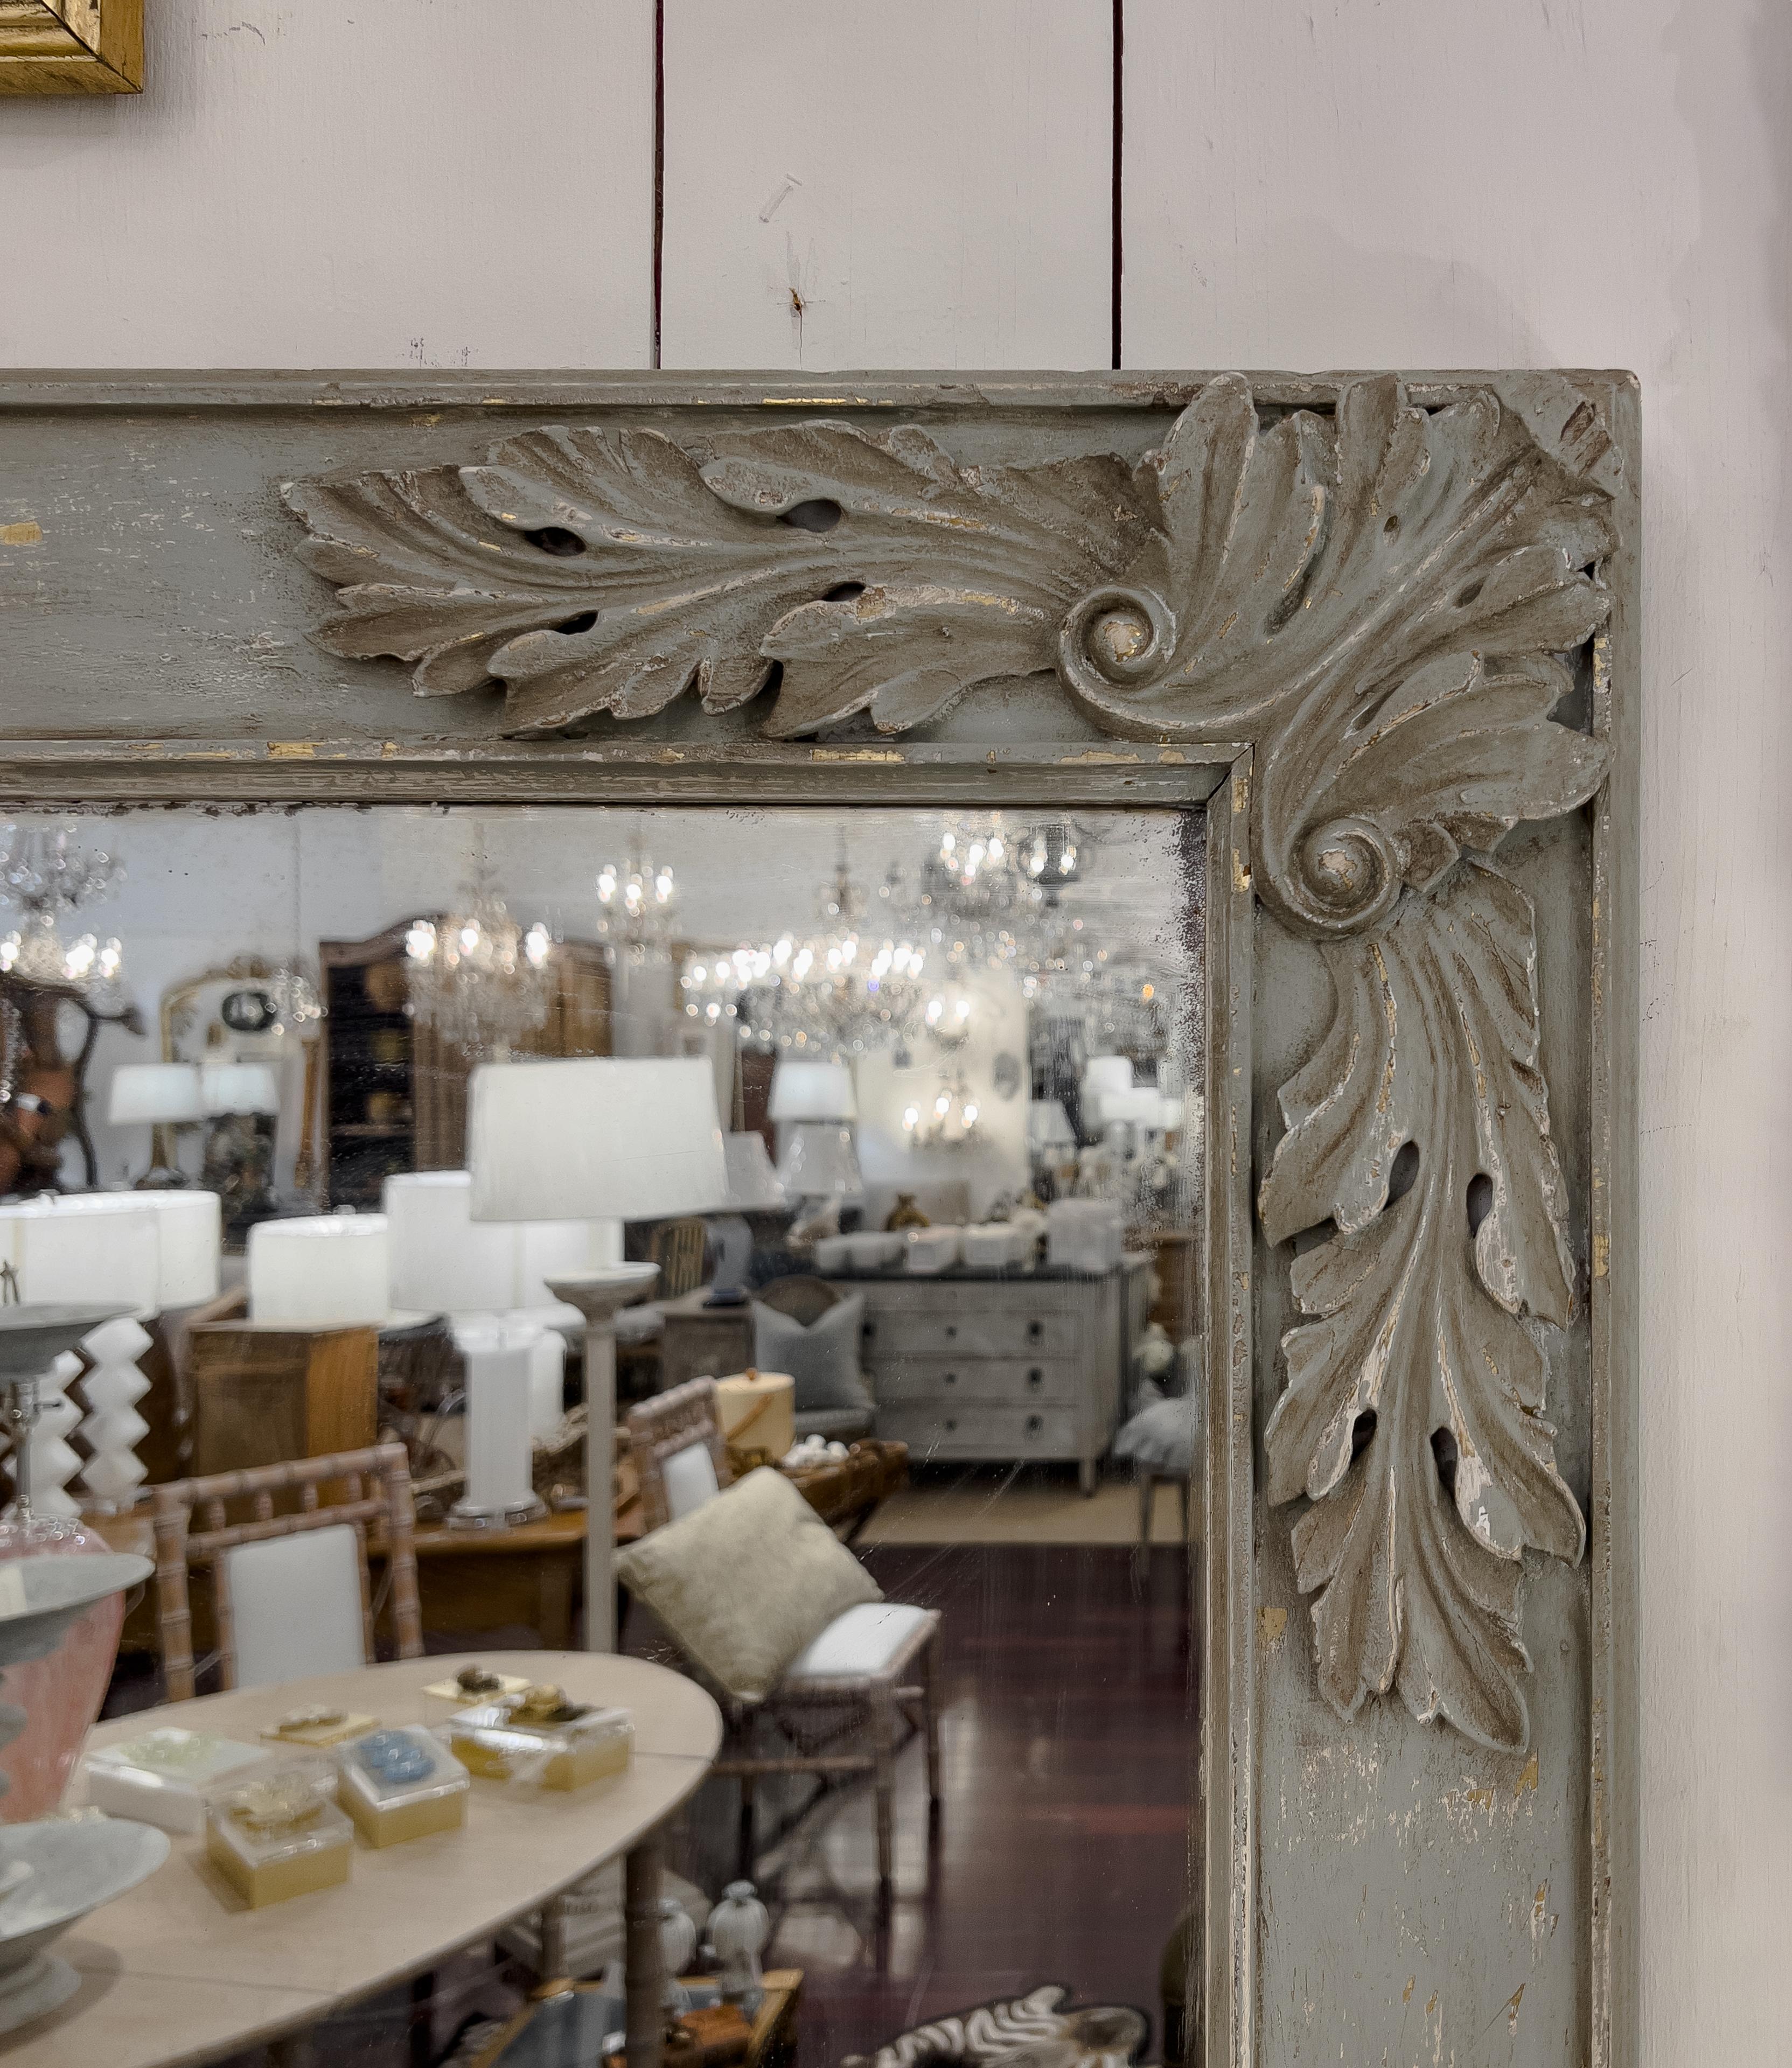 Antique rectangular French Empire style Painted Mirror with carved acanthus leaf and rosette detail on the frame. This piece is suitable to hang horizontally or vertically.